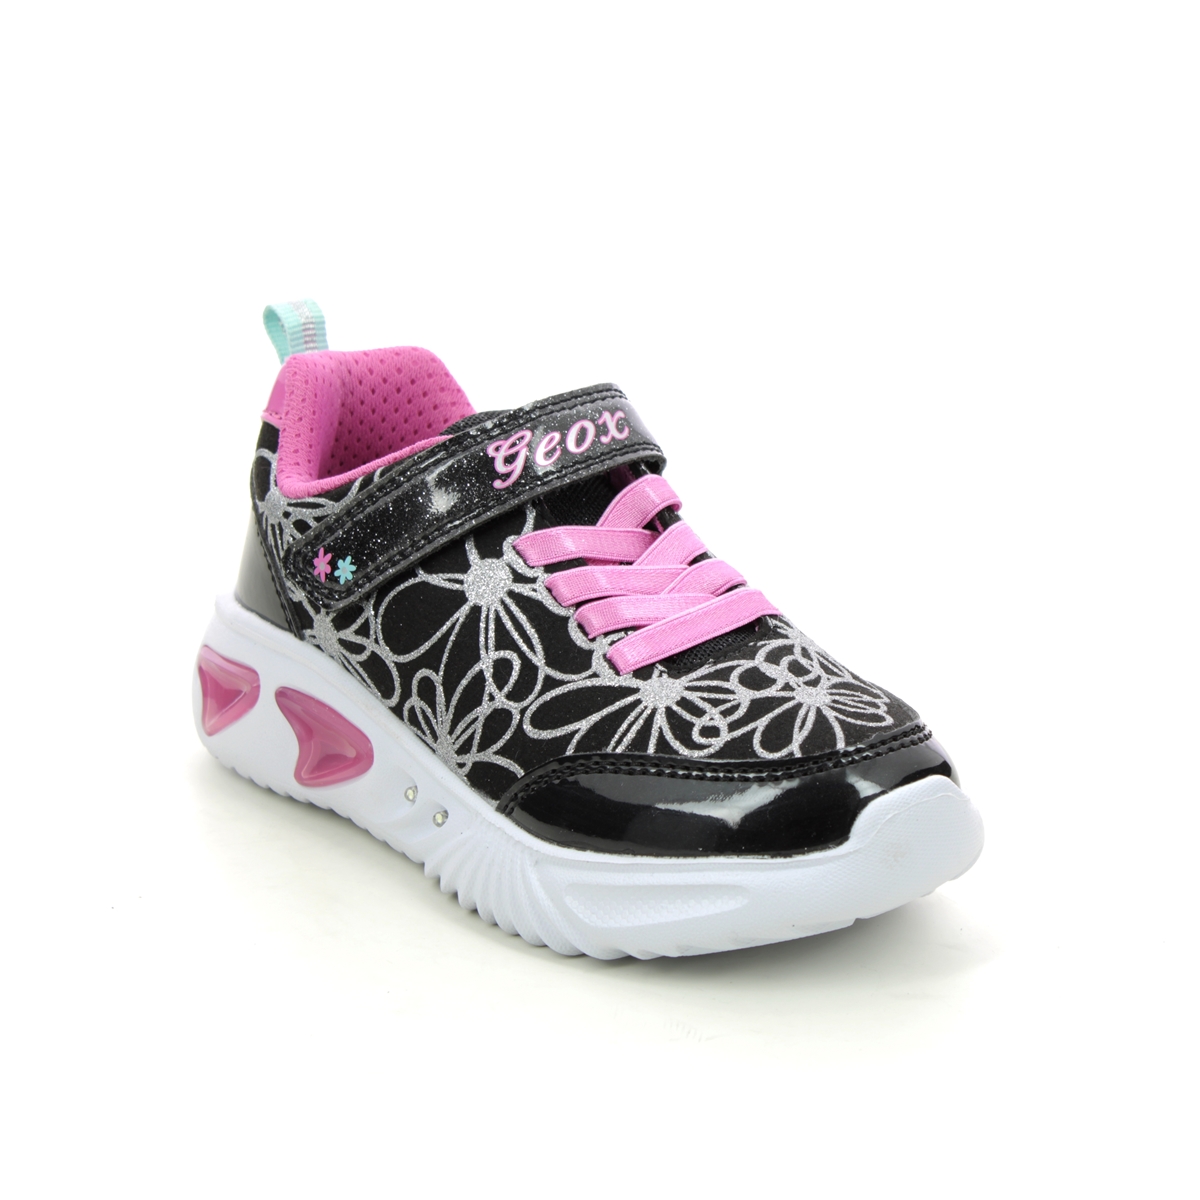 Geox - Assister Lights (Black Pink) J26E9A-C0922 In Size 32 In Plain Black Pink For kids